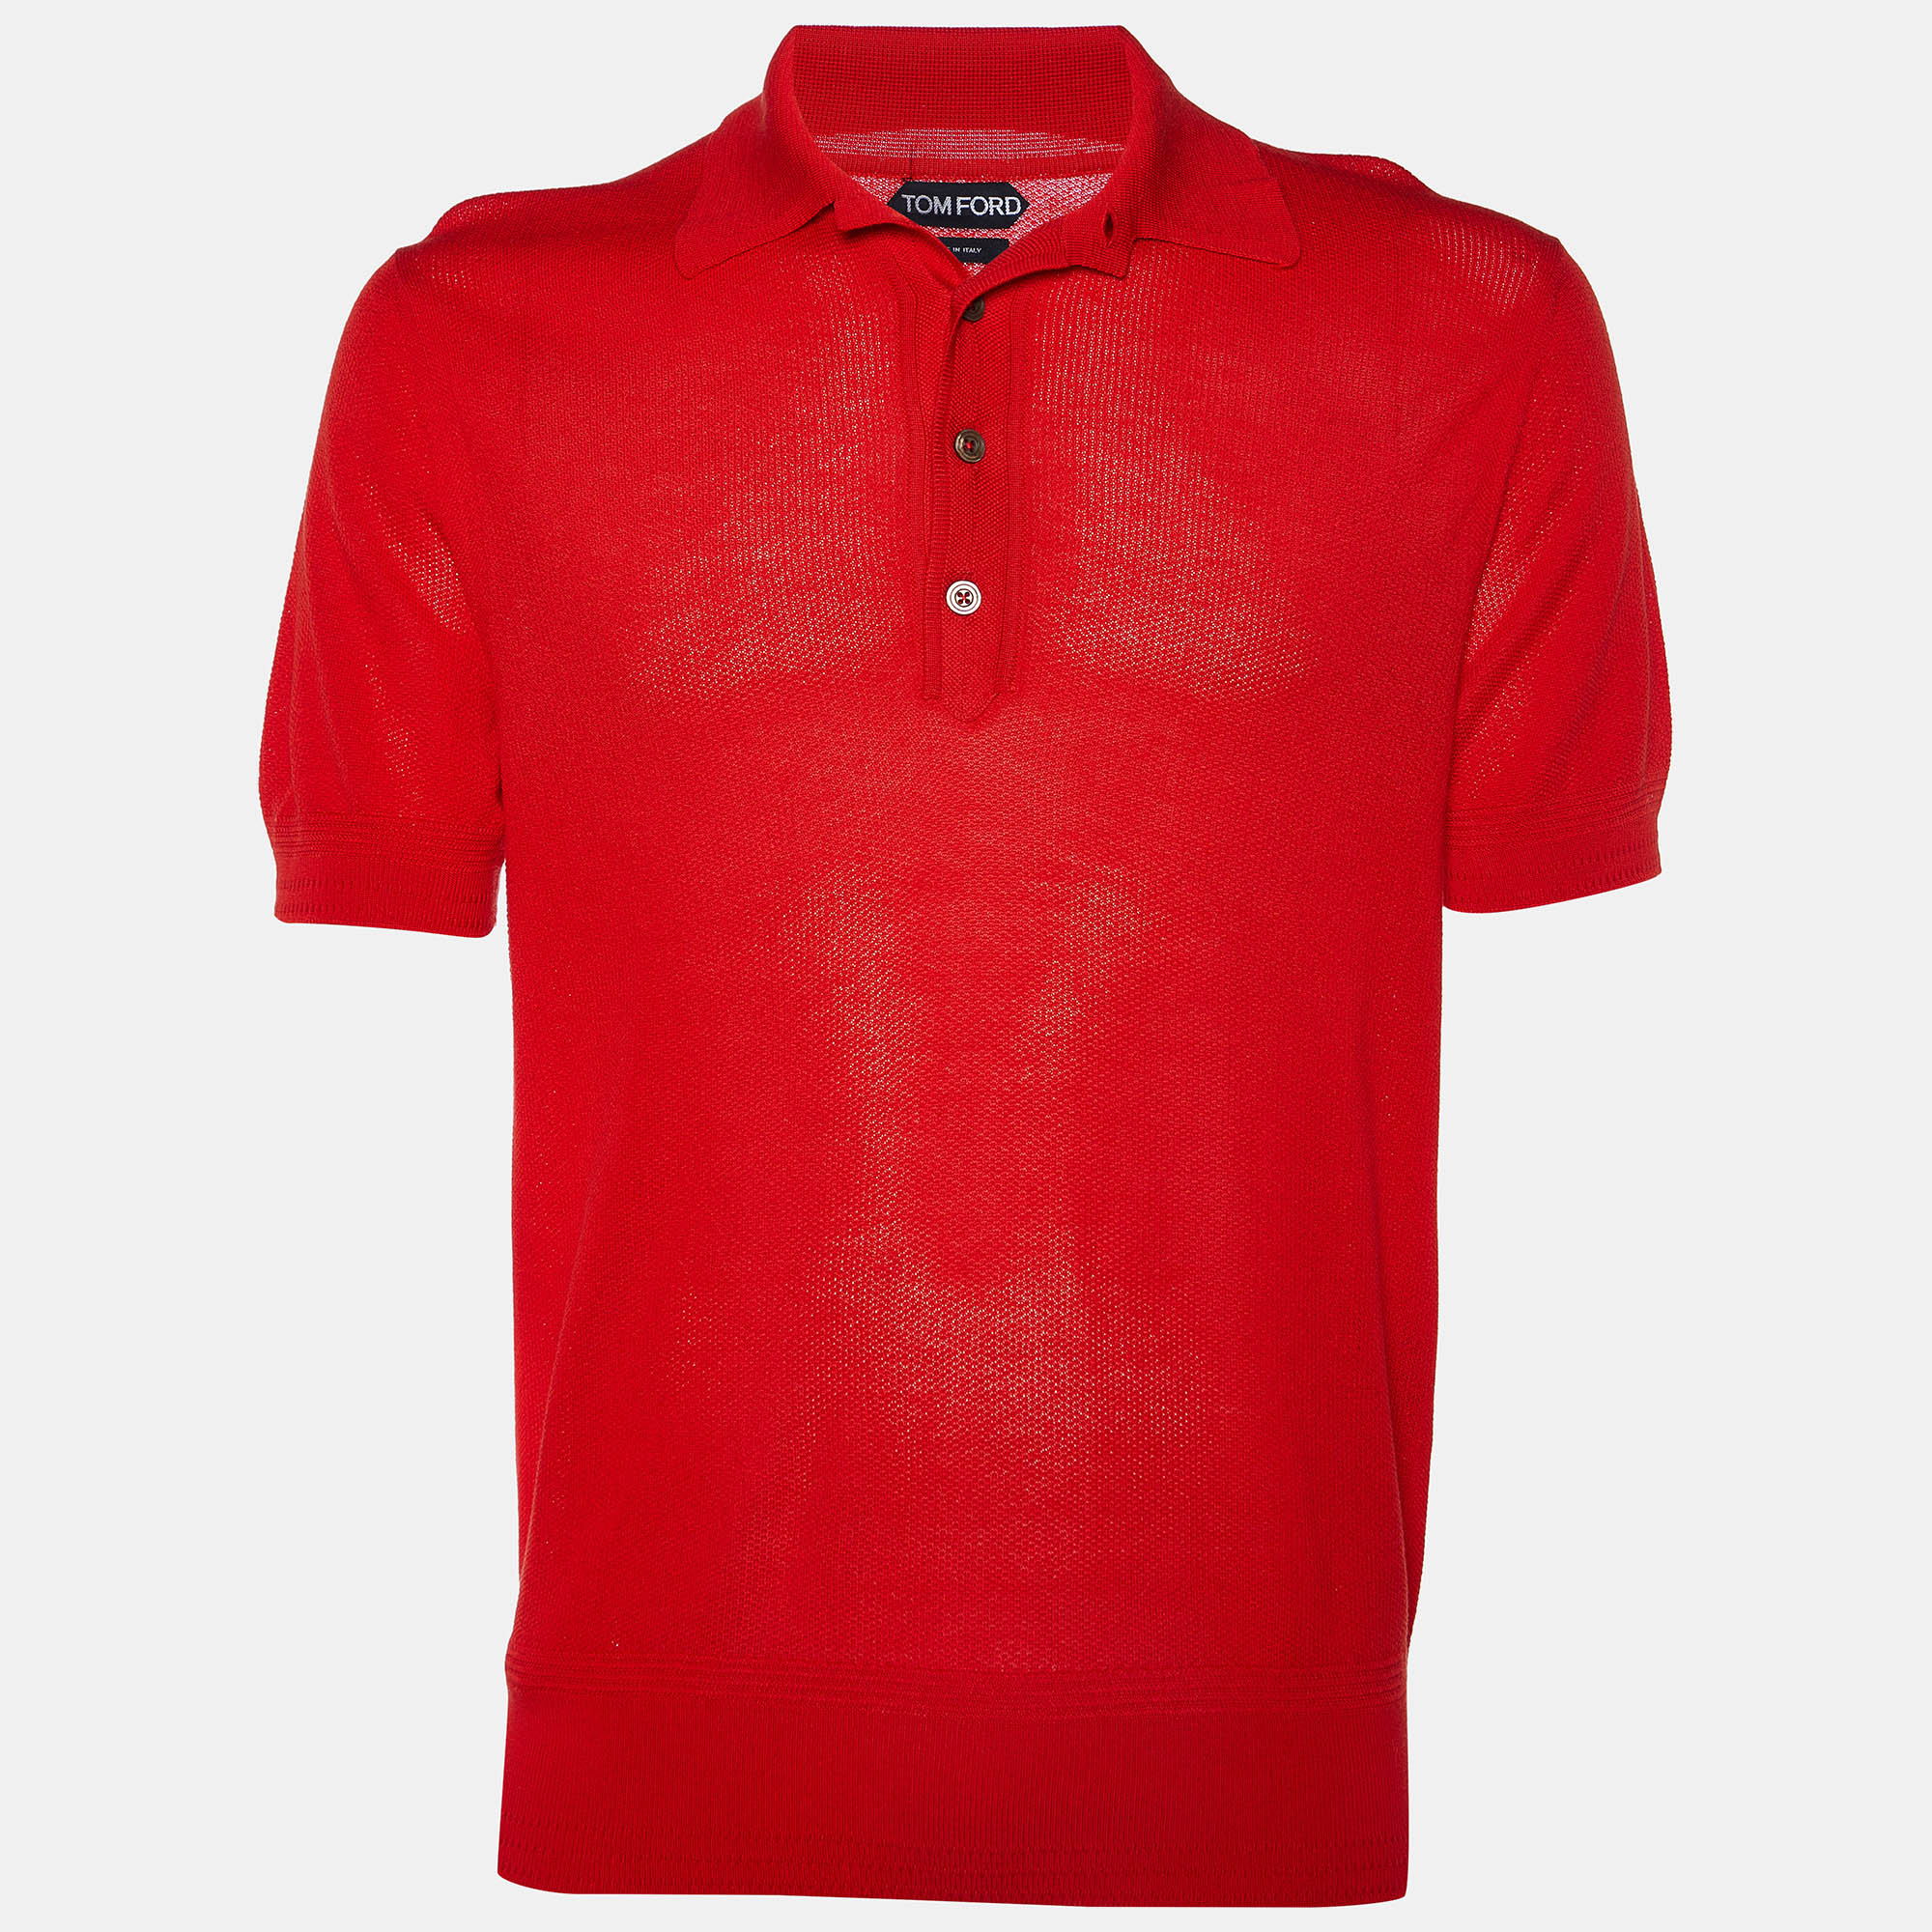 Pre-owned Tom Ford Red Cotton Knit Polo T-shirt L